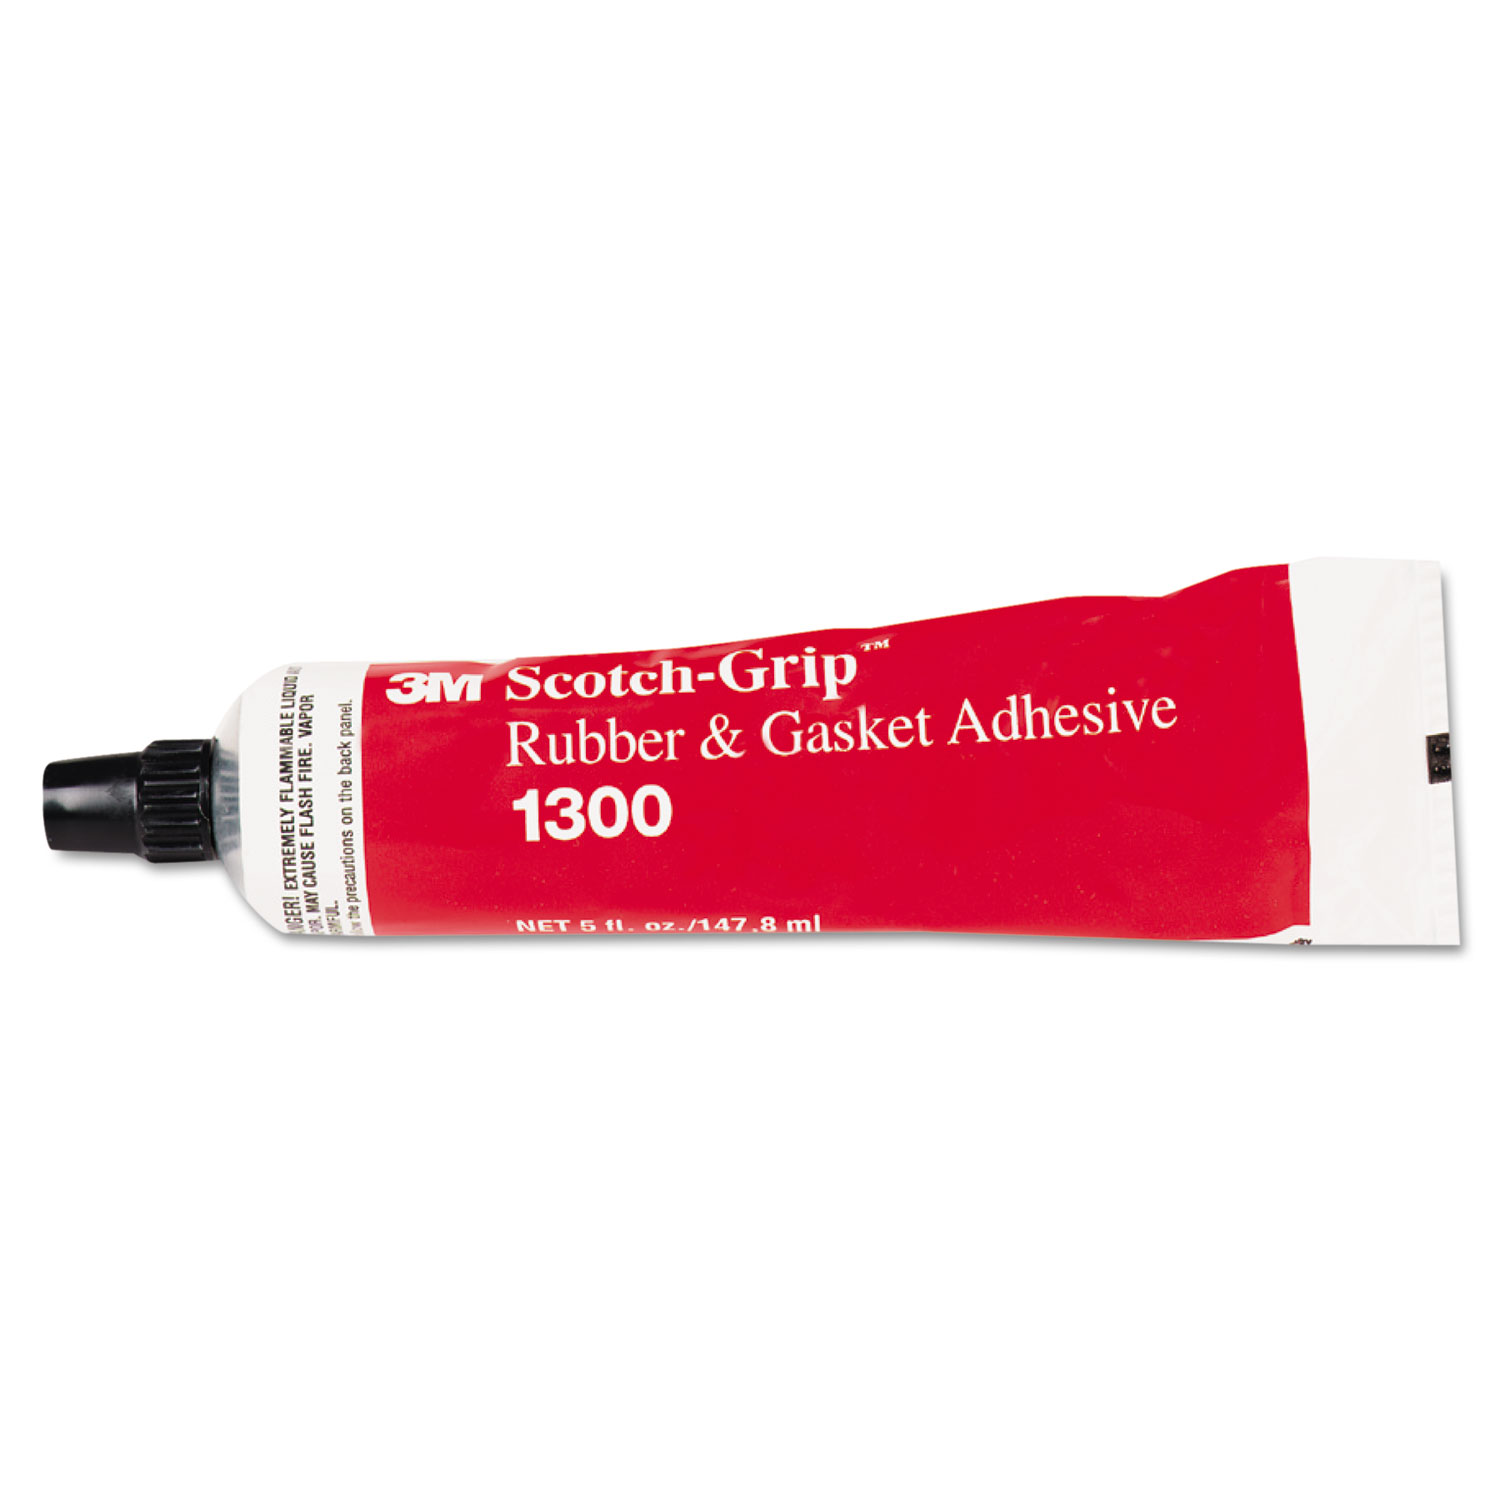 Scotch-Grip Rubber-Gasket Adhesive